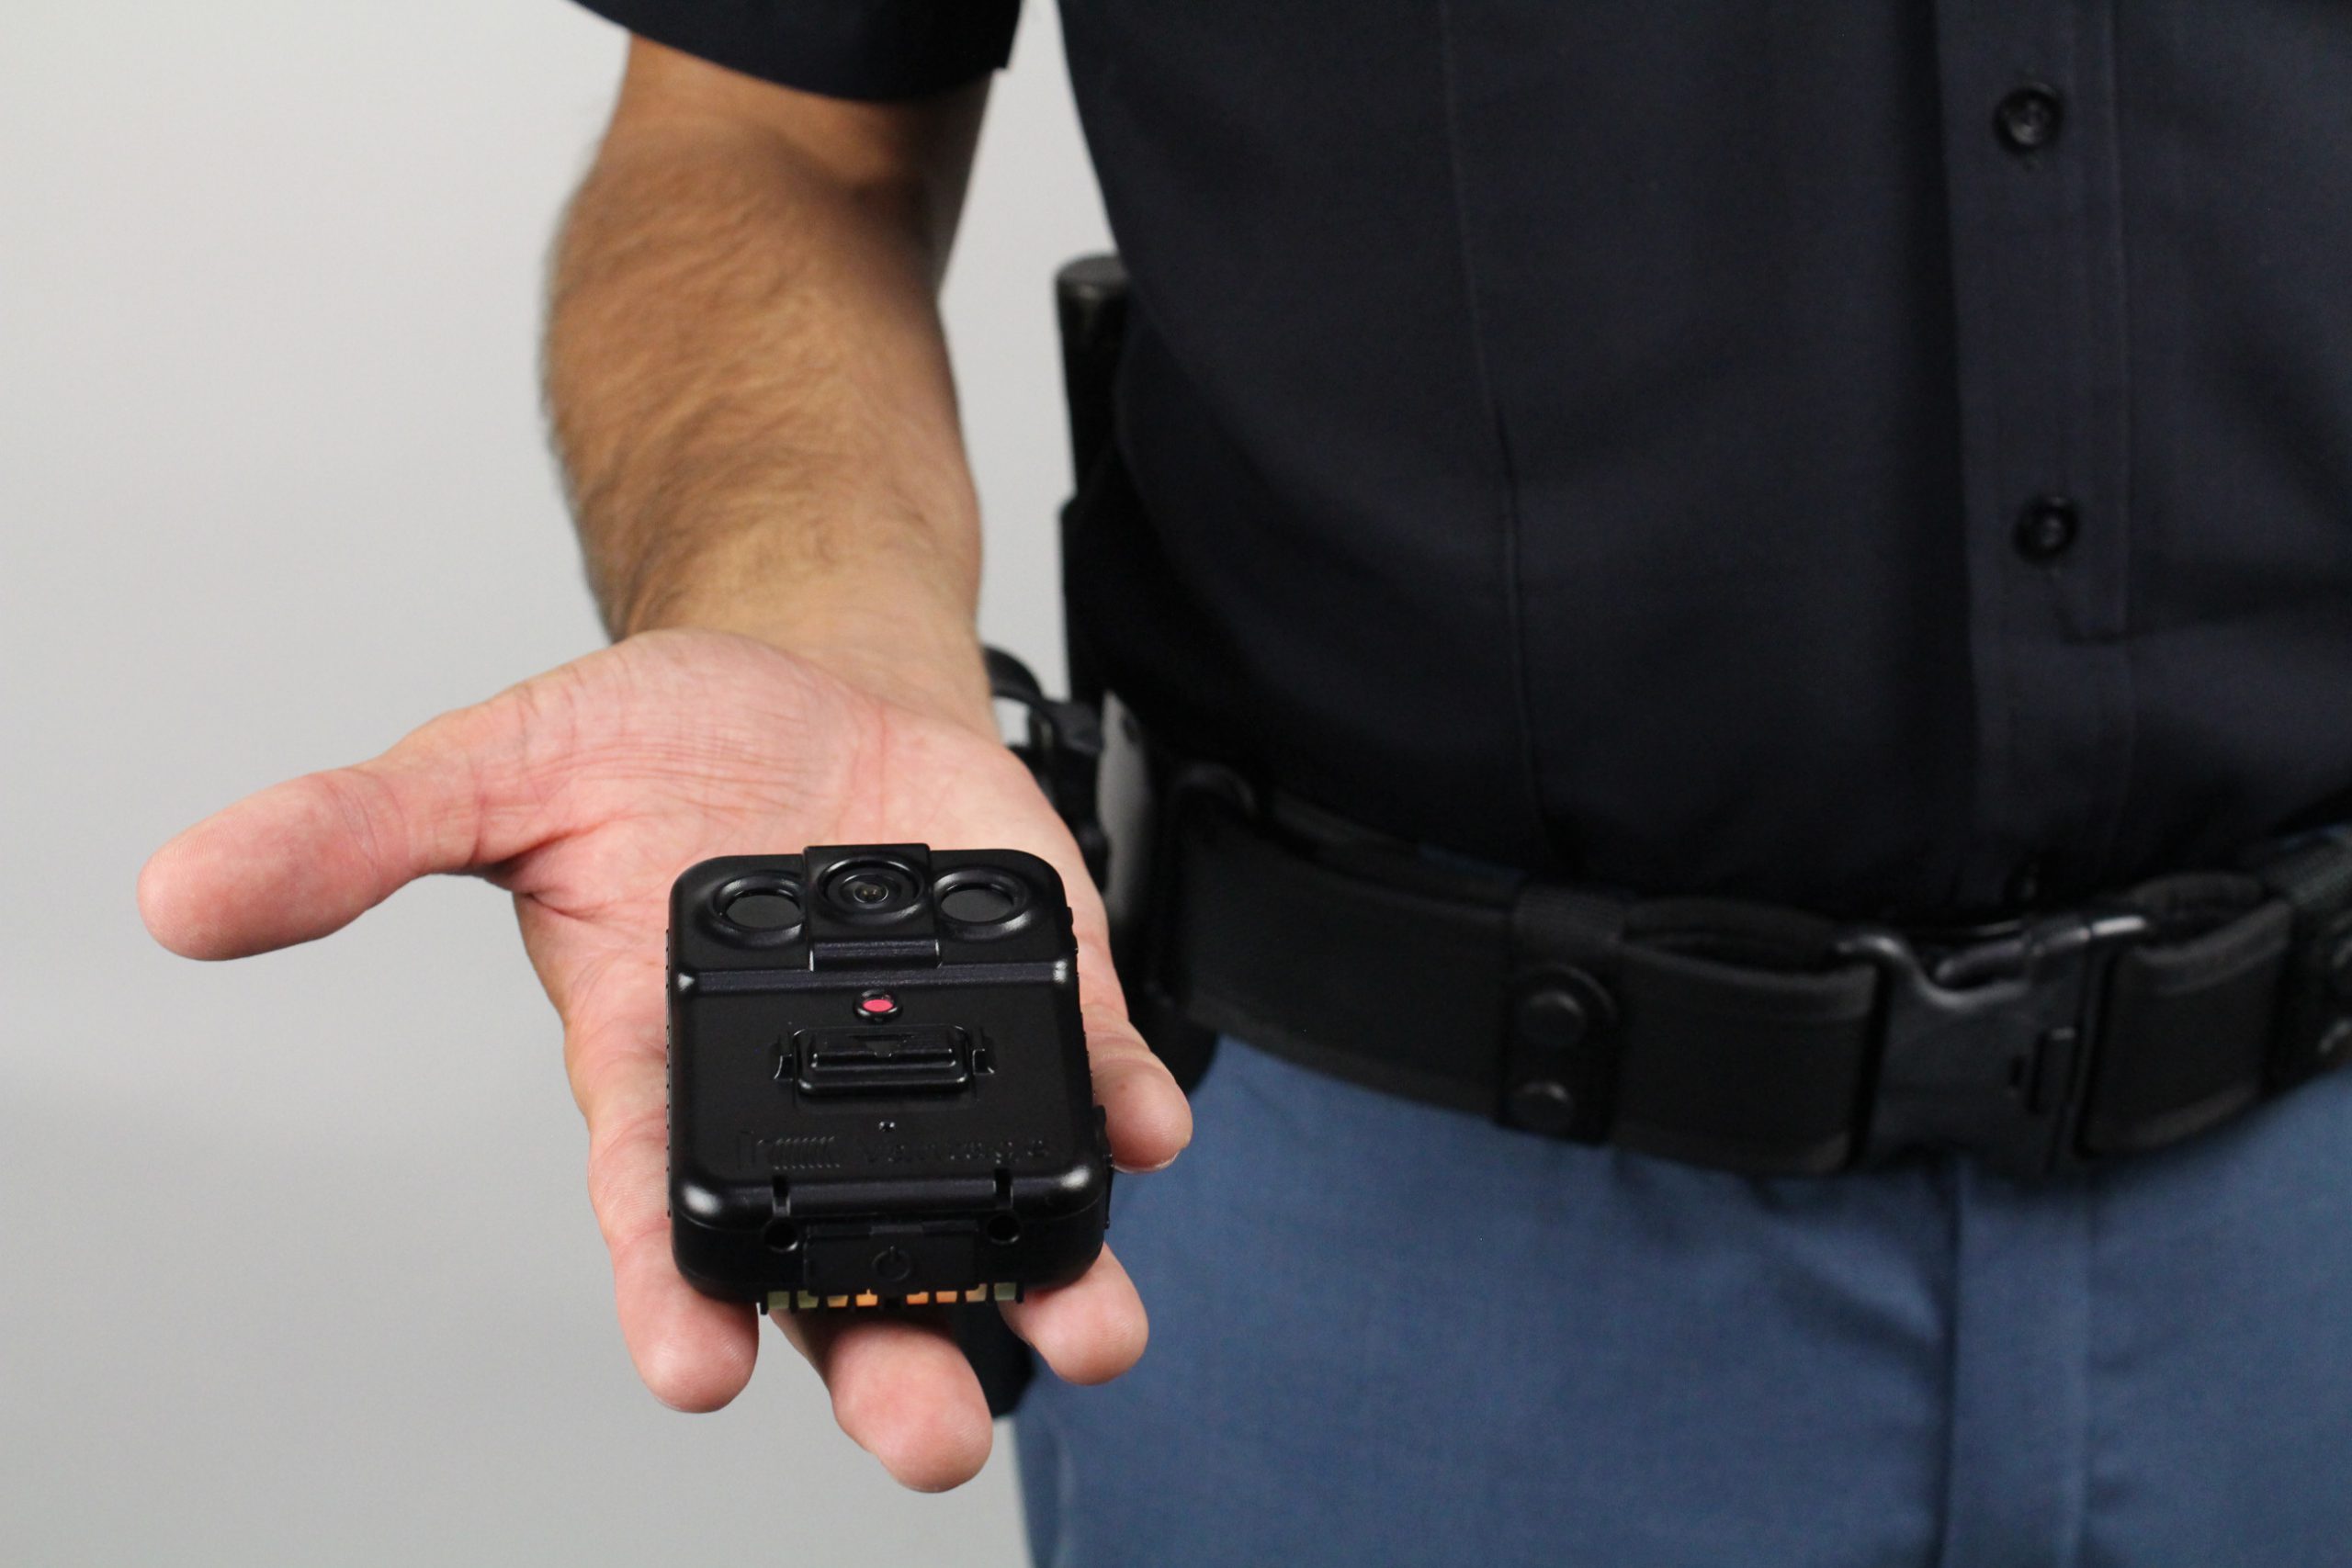 Police now rolling out body cameras, describe instances where they